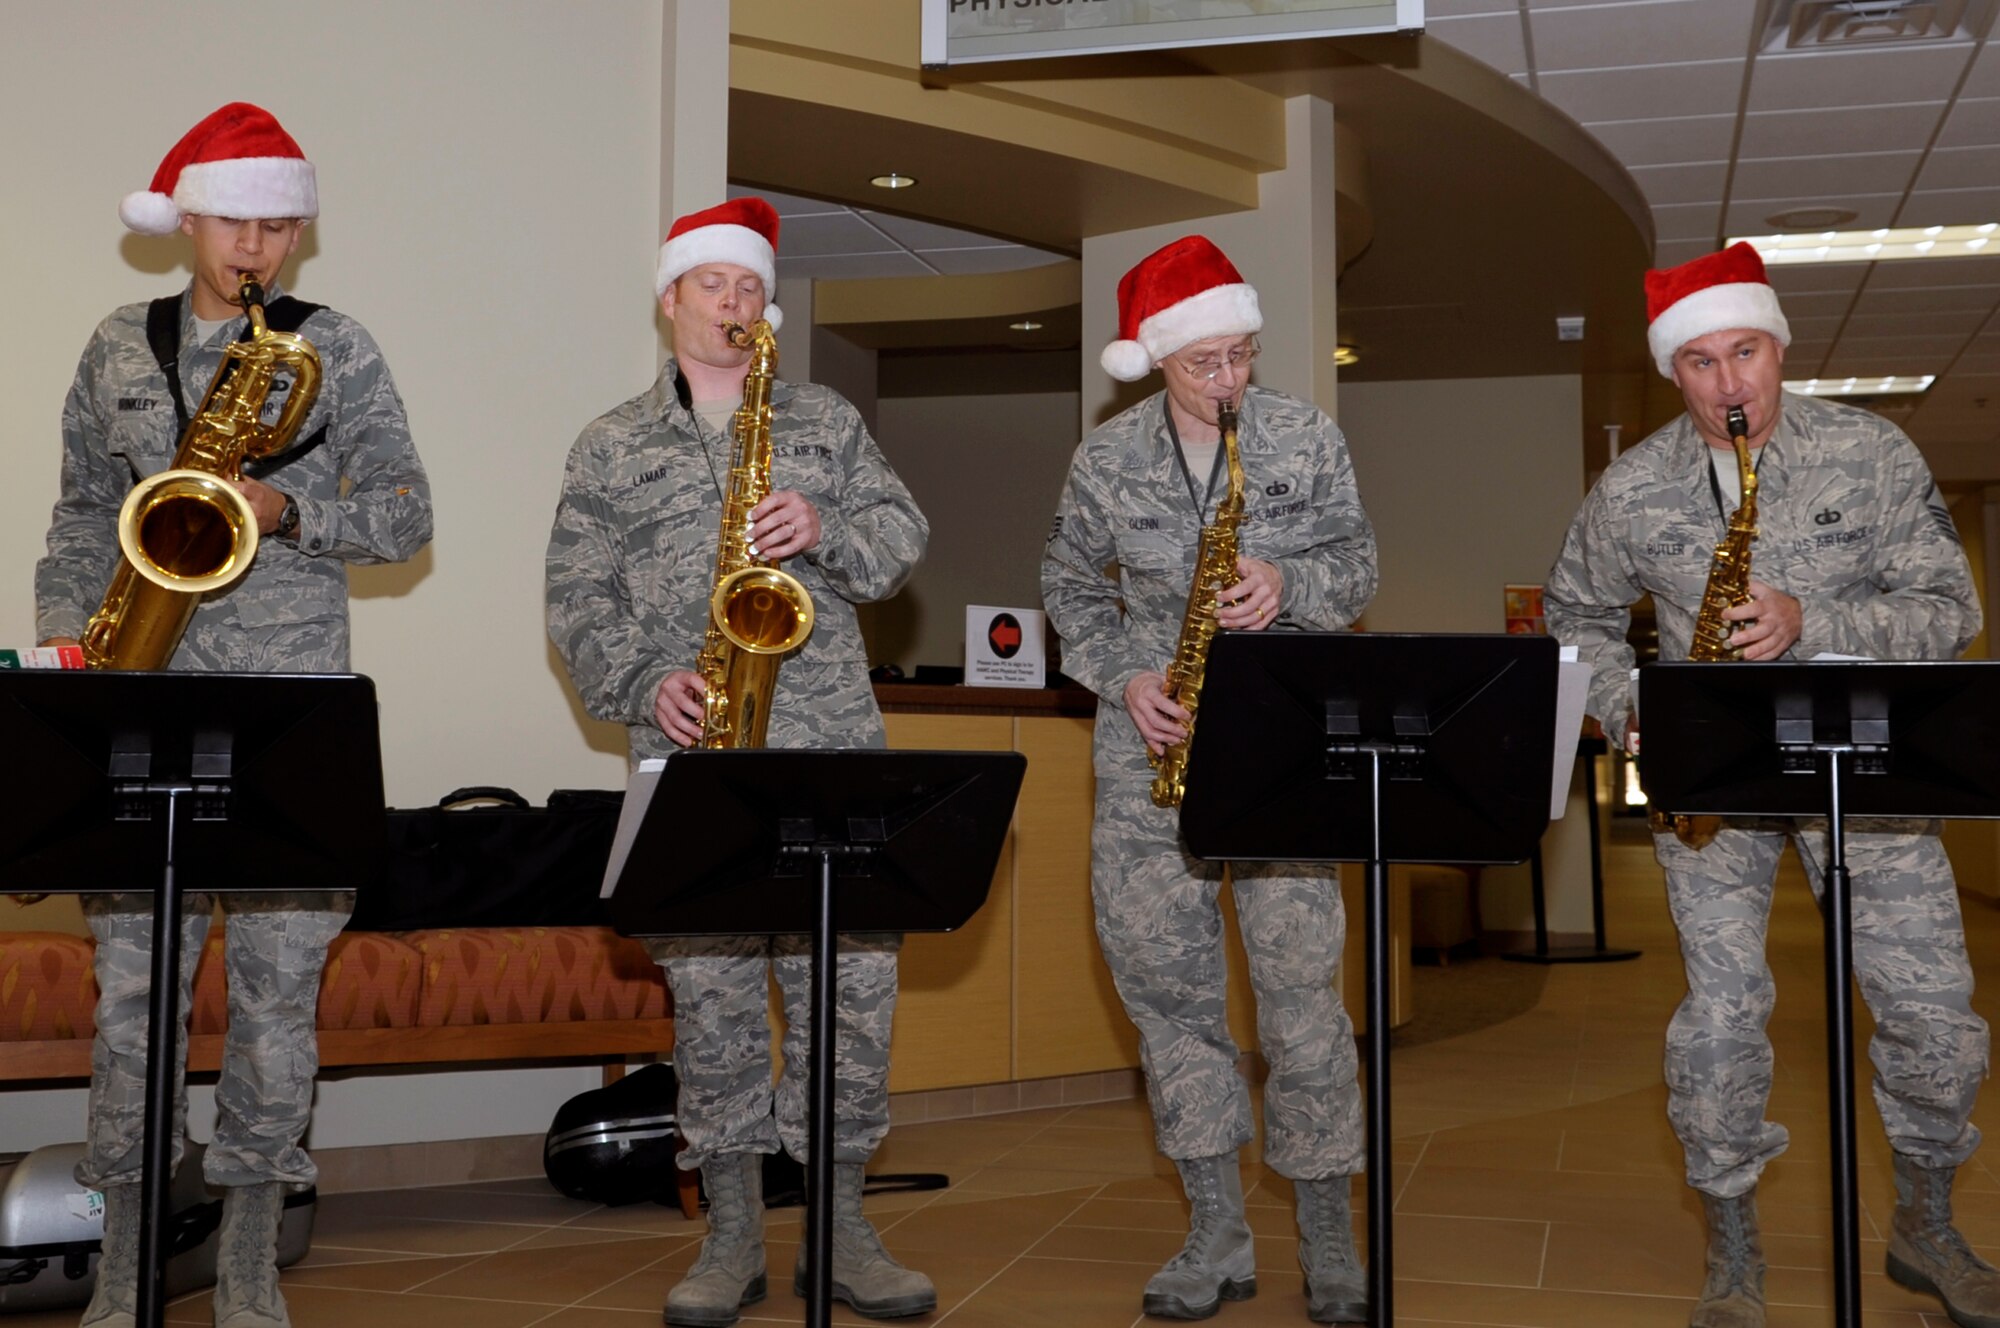 VANDENBERG AIR FORCE BASE, Calif. -- Master Sgt. James Butler, Staff Sgt. Ron Glenn, Airman 1st Class Issac Lamar and Airman 1st Class Caleb Brinkley from the Band of the Golden West, Travis AFB, Calif., perform Christmas carols in the 30th Medical Group foyer here Thursday, Dec. 8, 2011. The saxophone quartet toured main base and played Christmas songs to members of Vandenberg. (U.S. Air Force photo/Jerry E. Clemens Jr.)